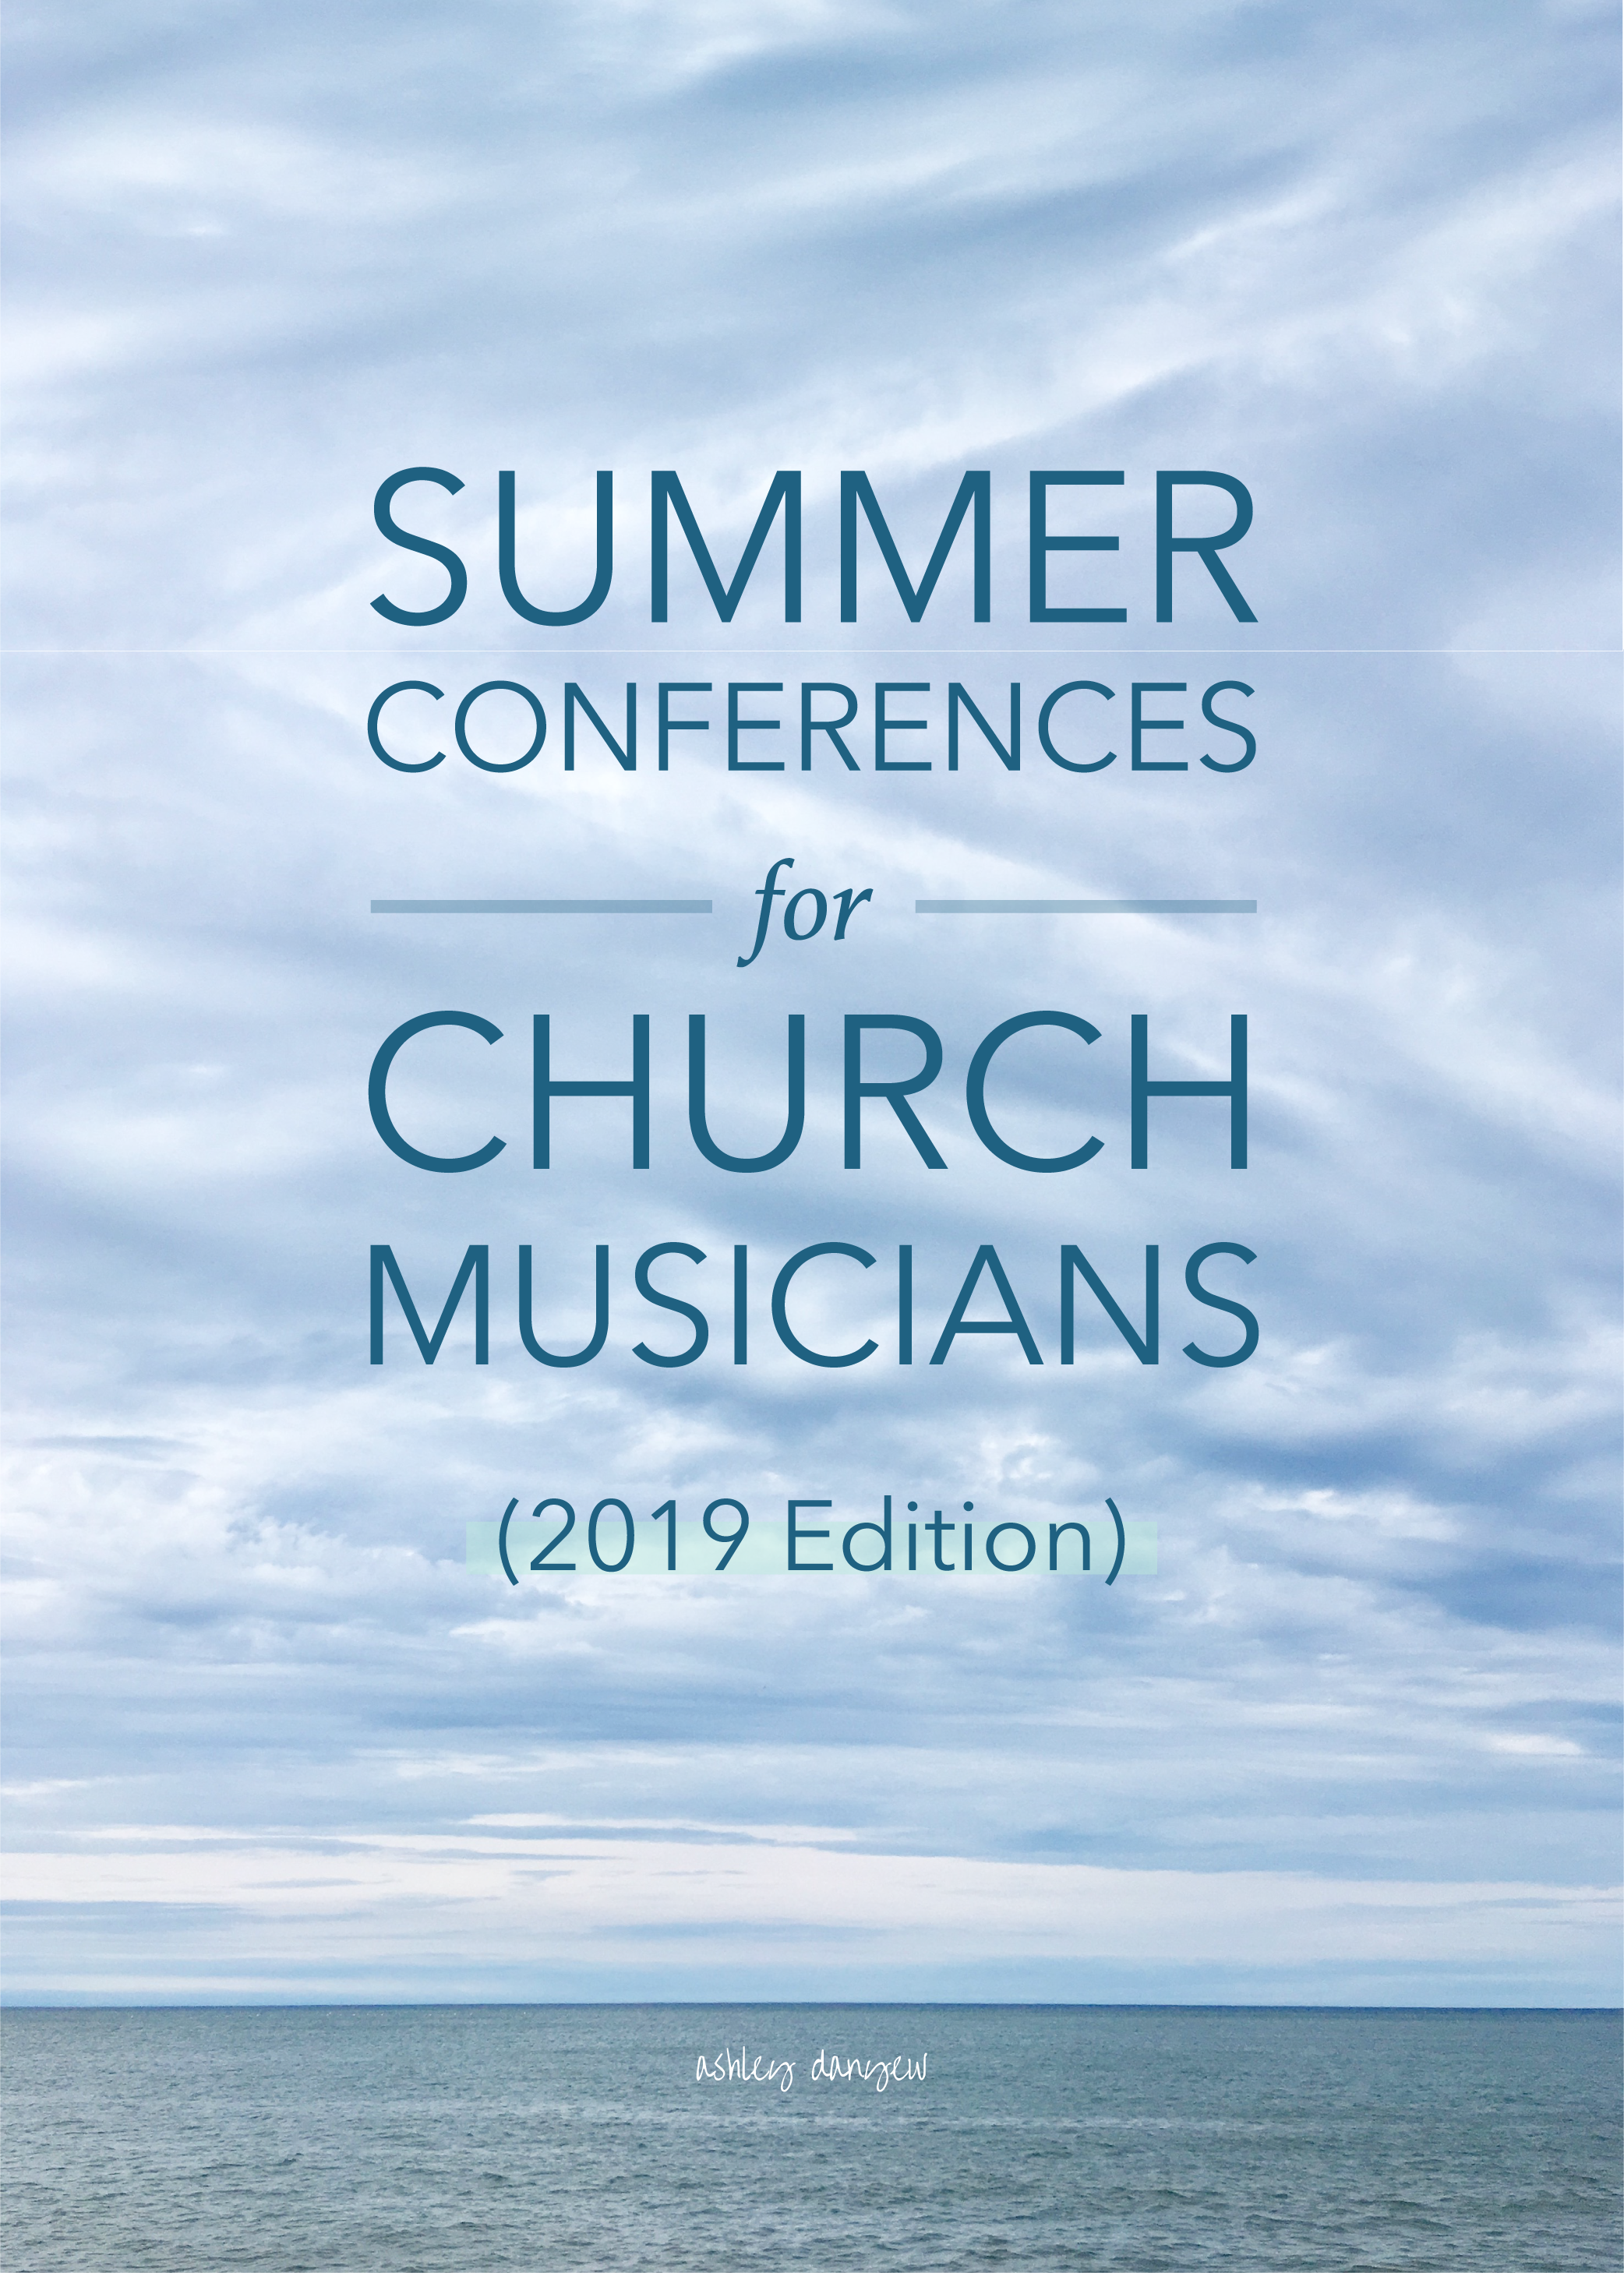 Summer Conferences for Church Musicians (2019 Edition)